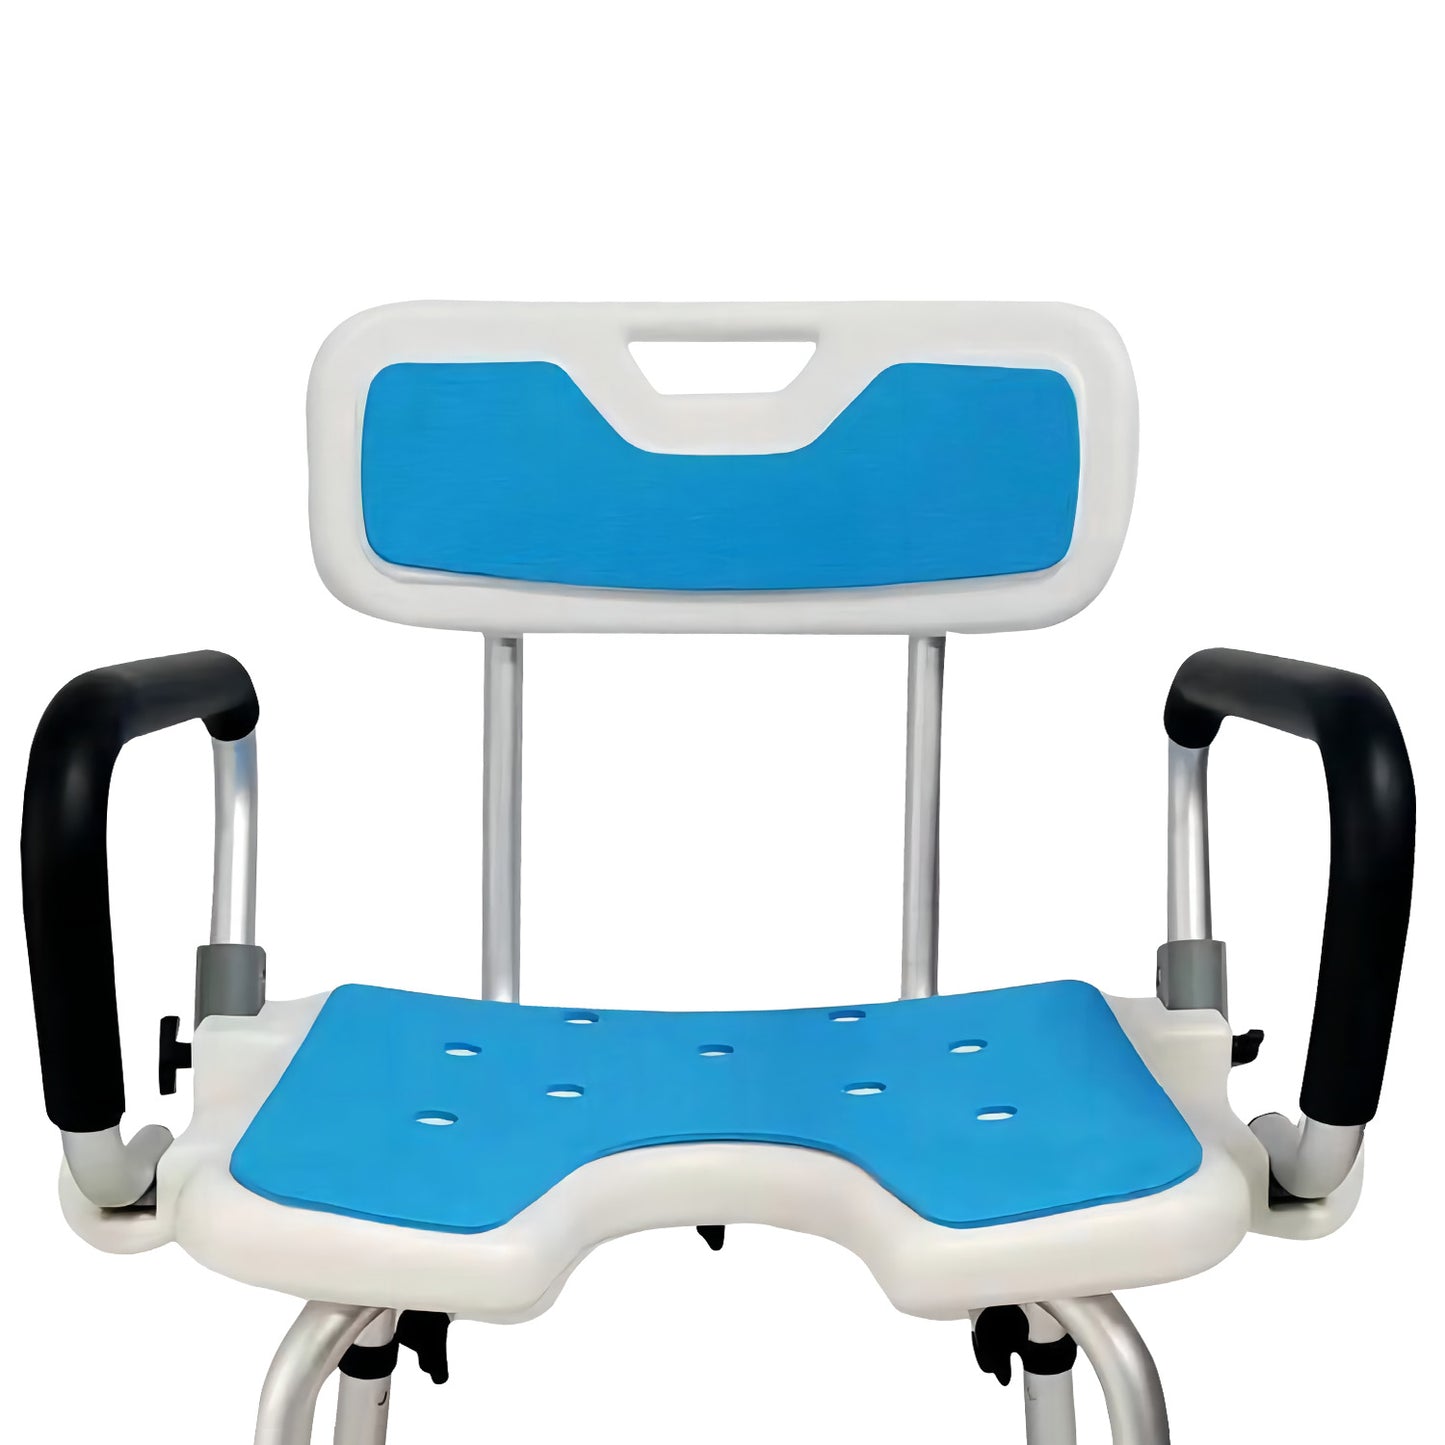 Orthonica Height Adjustable Aluminium Shower Chair With Adjustable Armrests